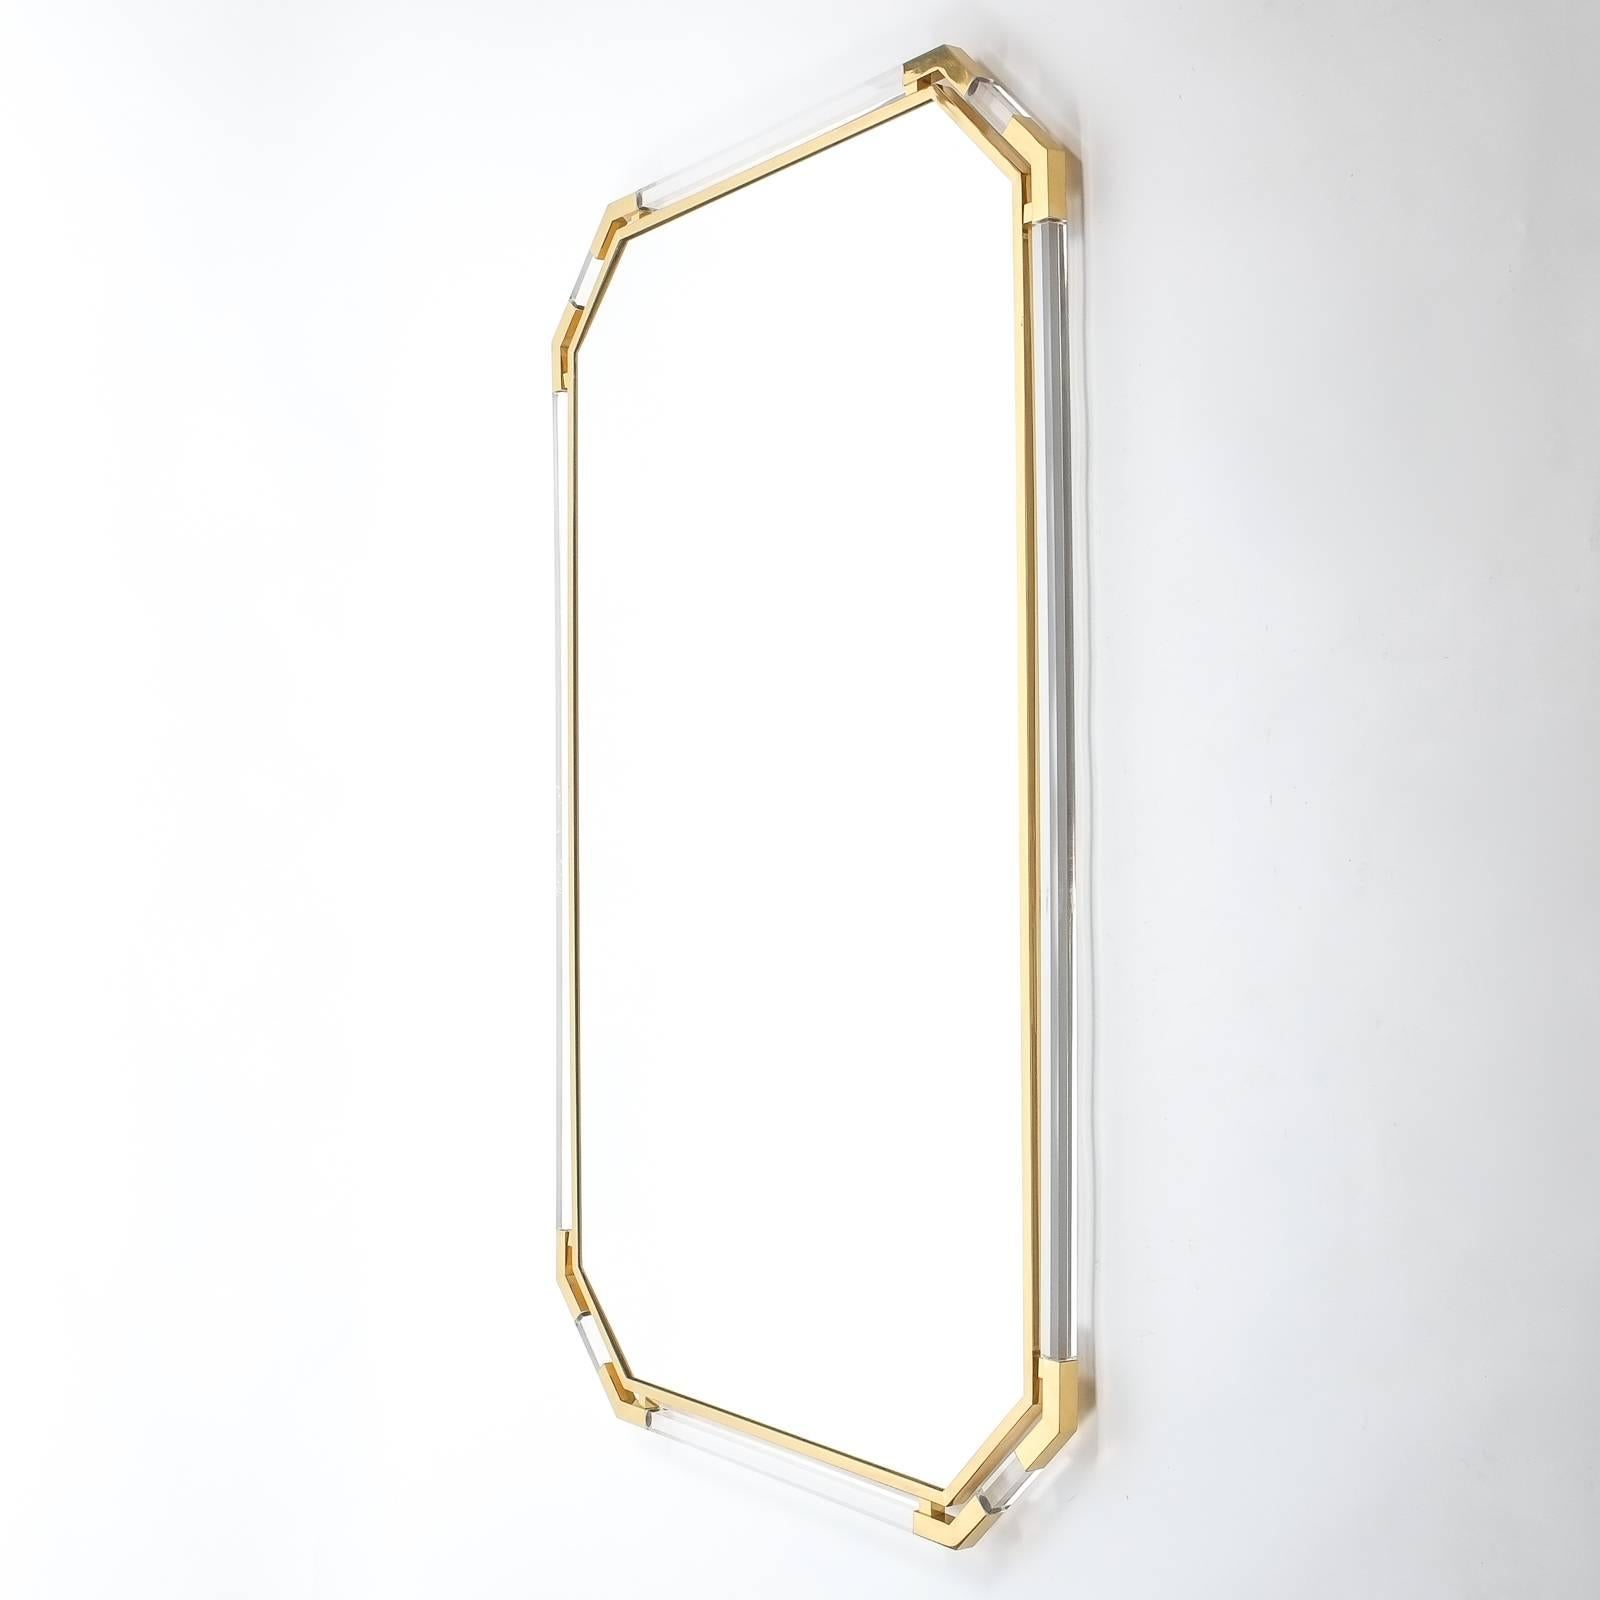 Magnificent 63 inch mirror by Guy Lefevre for Maison Jansen, Paris, 1970.
Beautiful double frame mirror with Lucite and brass construction. Heavy quality piece in great condition with hardly any wear to the frame. The mirror can either be hung up